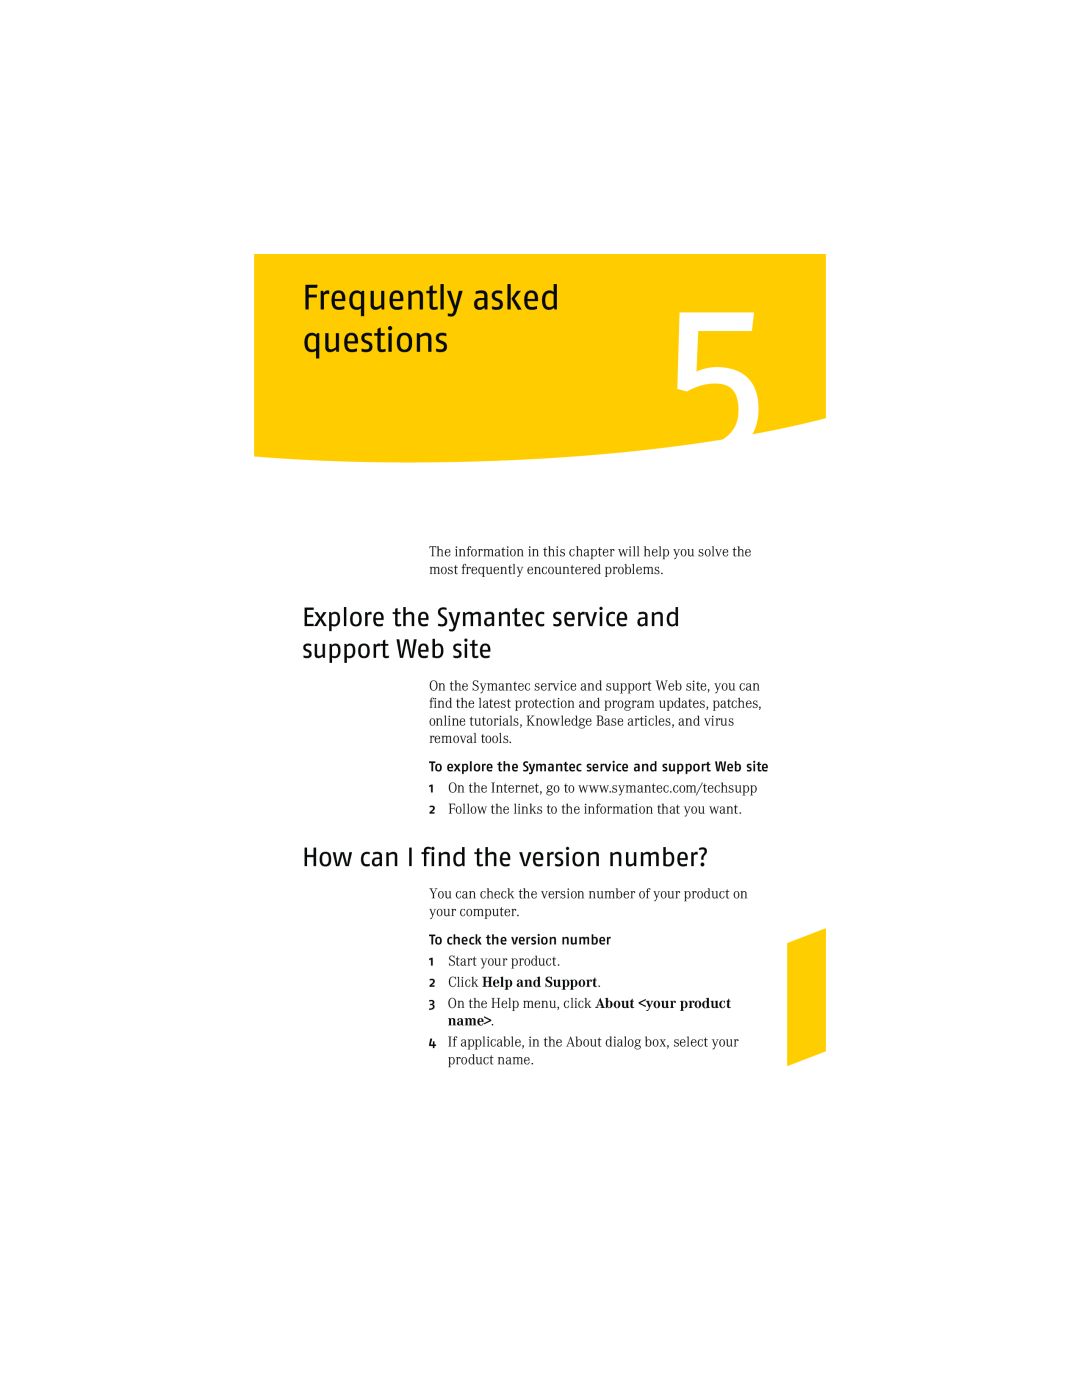 Symantec NIS2005 manual Frequently asked, questions, Explore the Symantec service and support Web site 